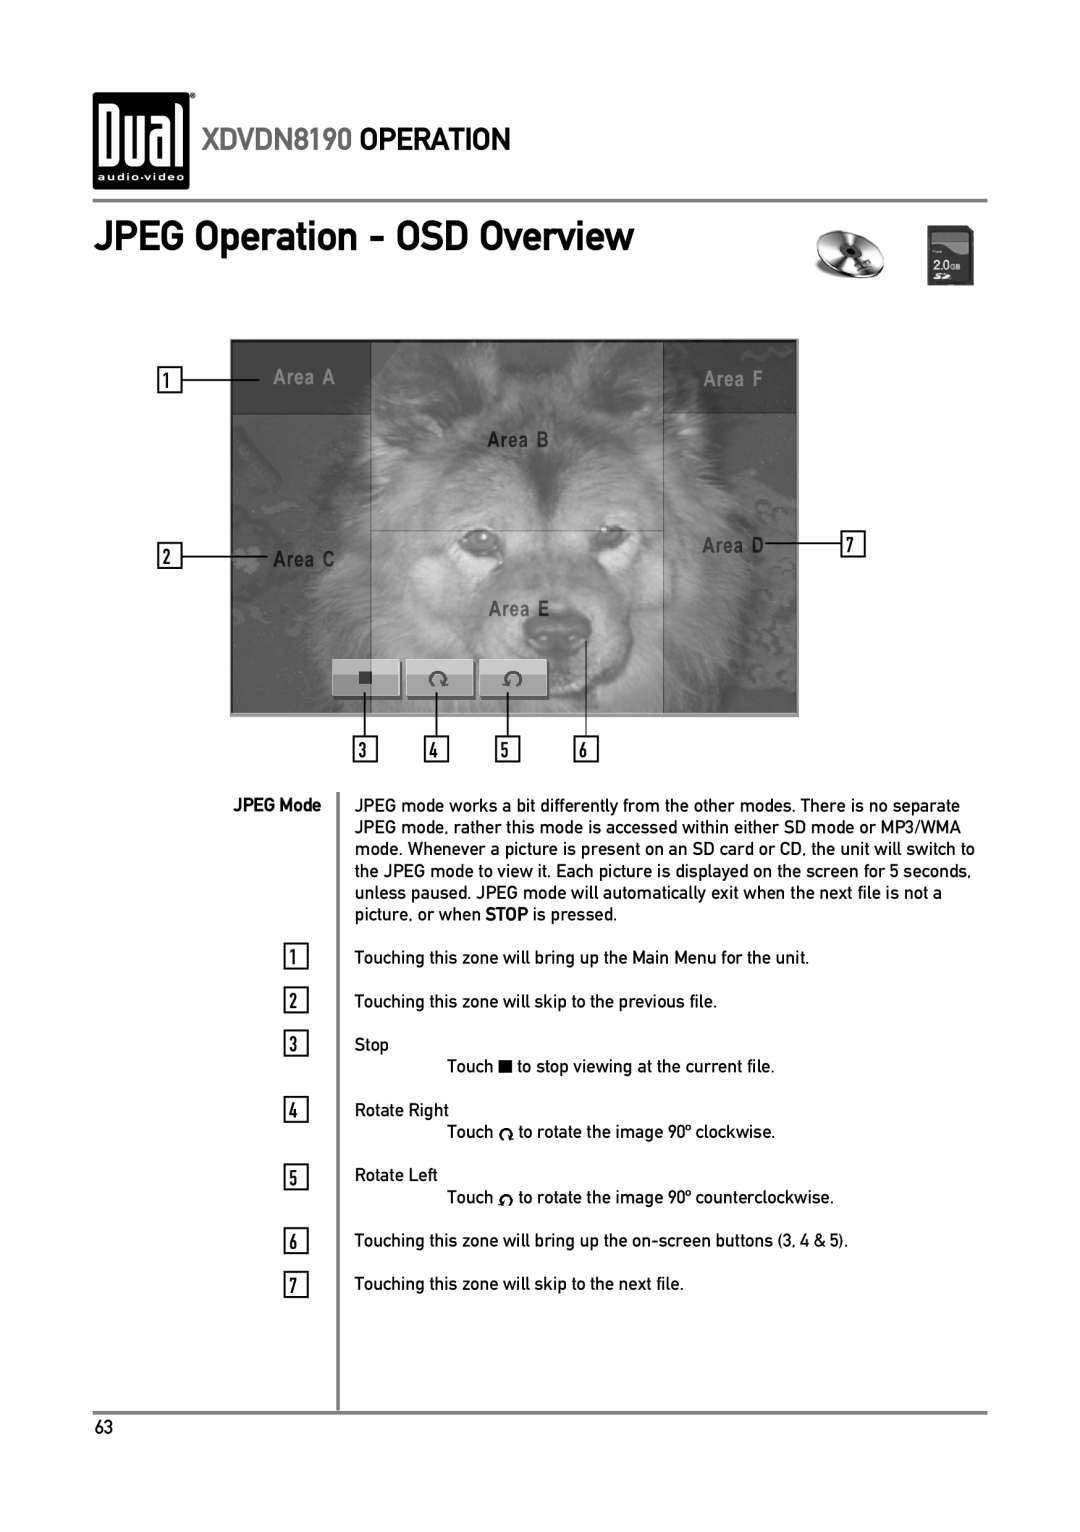 Dual owner manual JPEG Operation - OSD Overview, XDVDN8190 OPERATION, JPEG Mode 